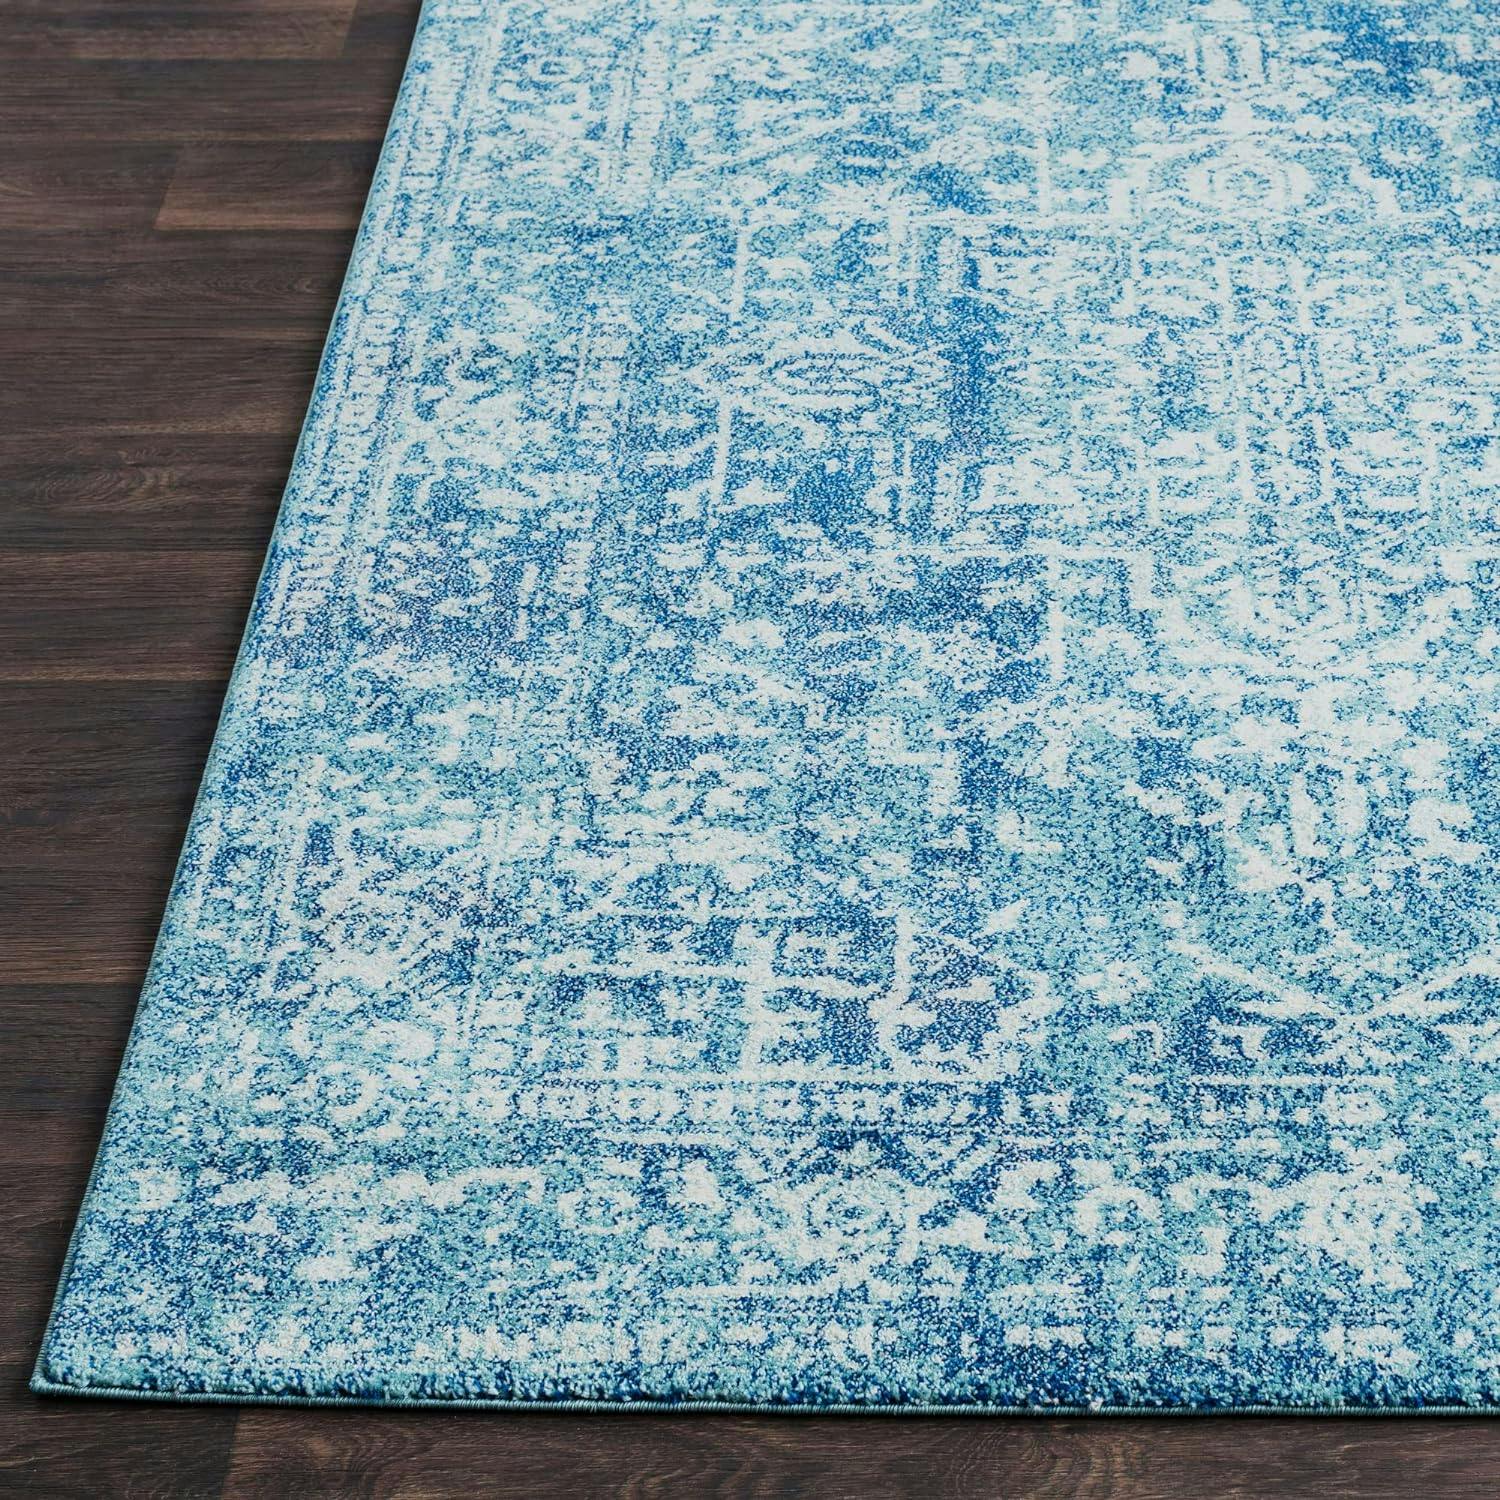 Reversible Teal Medallion 2'x3' Synthetic Area Rug